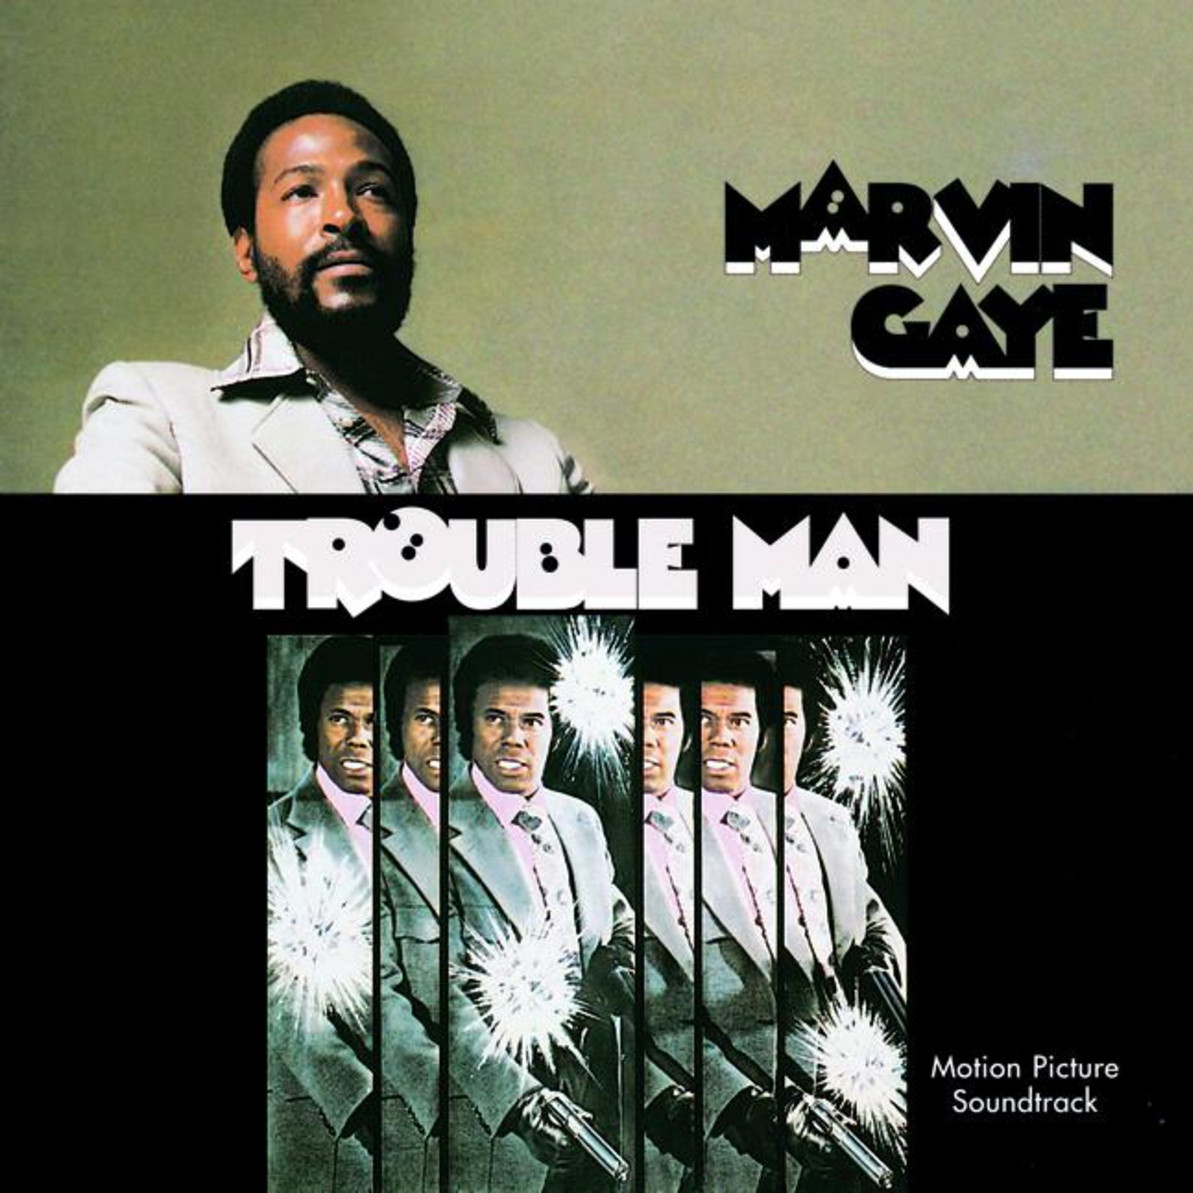 Main Theme From Trouble Man (2) - Instrumental/Soundtrack Version